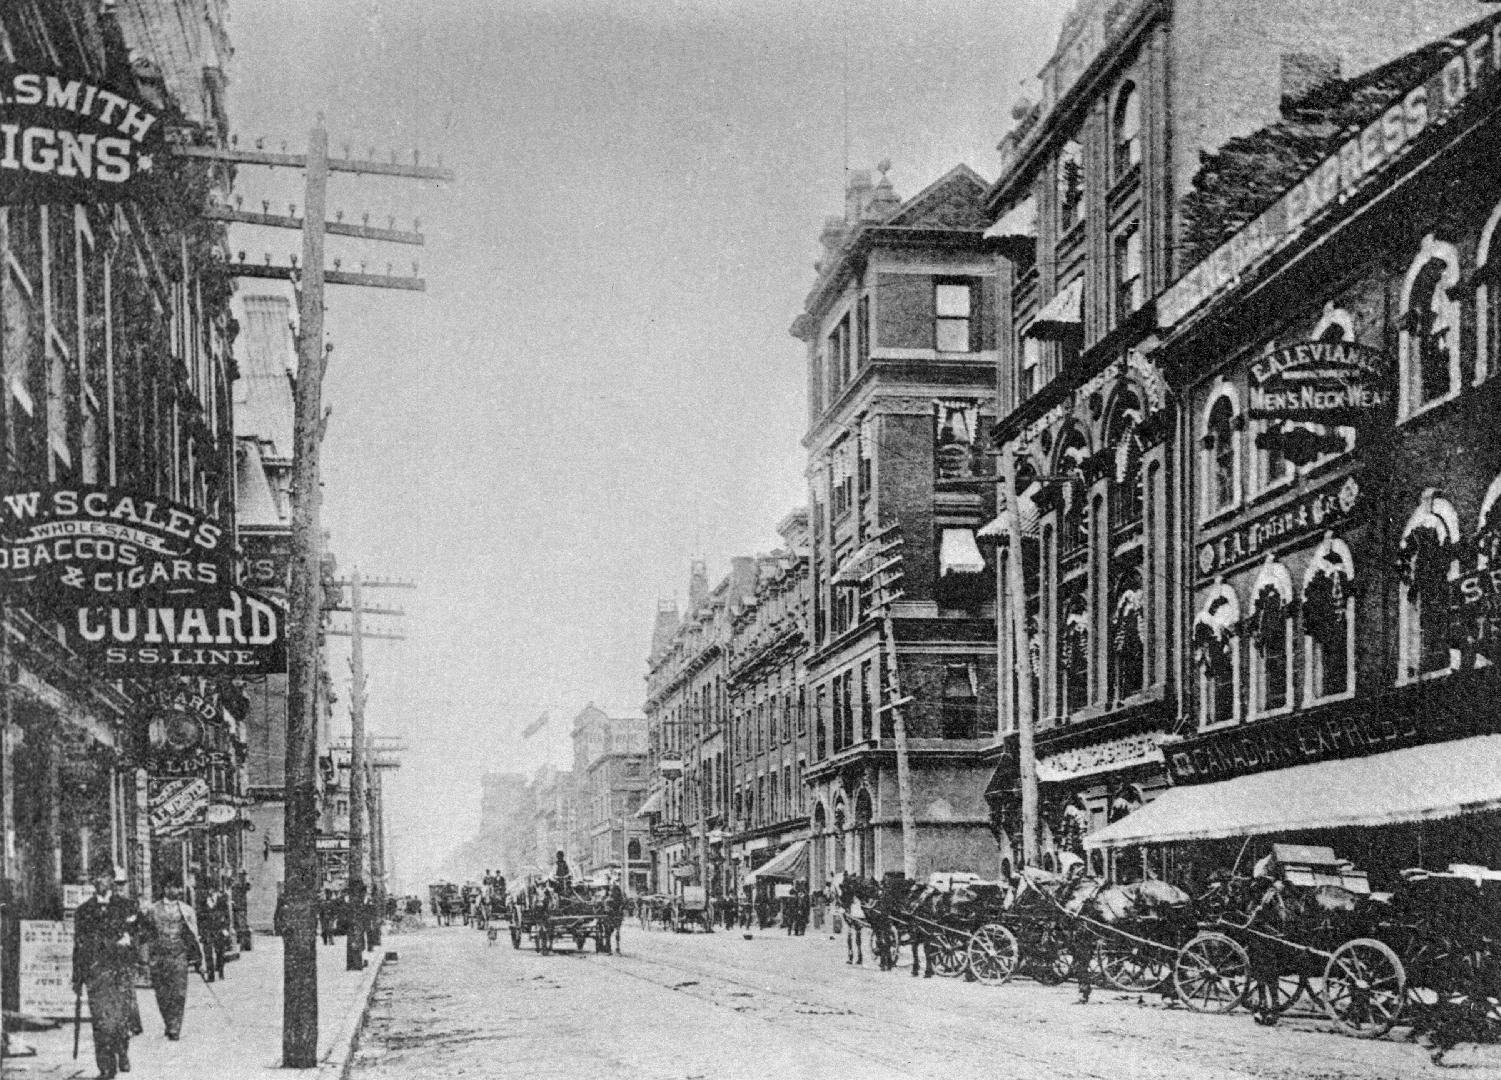 Yonge Street, S. of King St., looking north from south of Colborne St